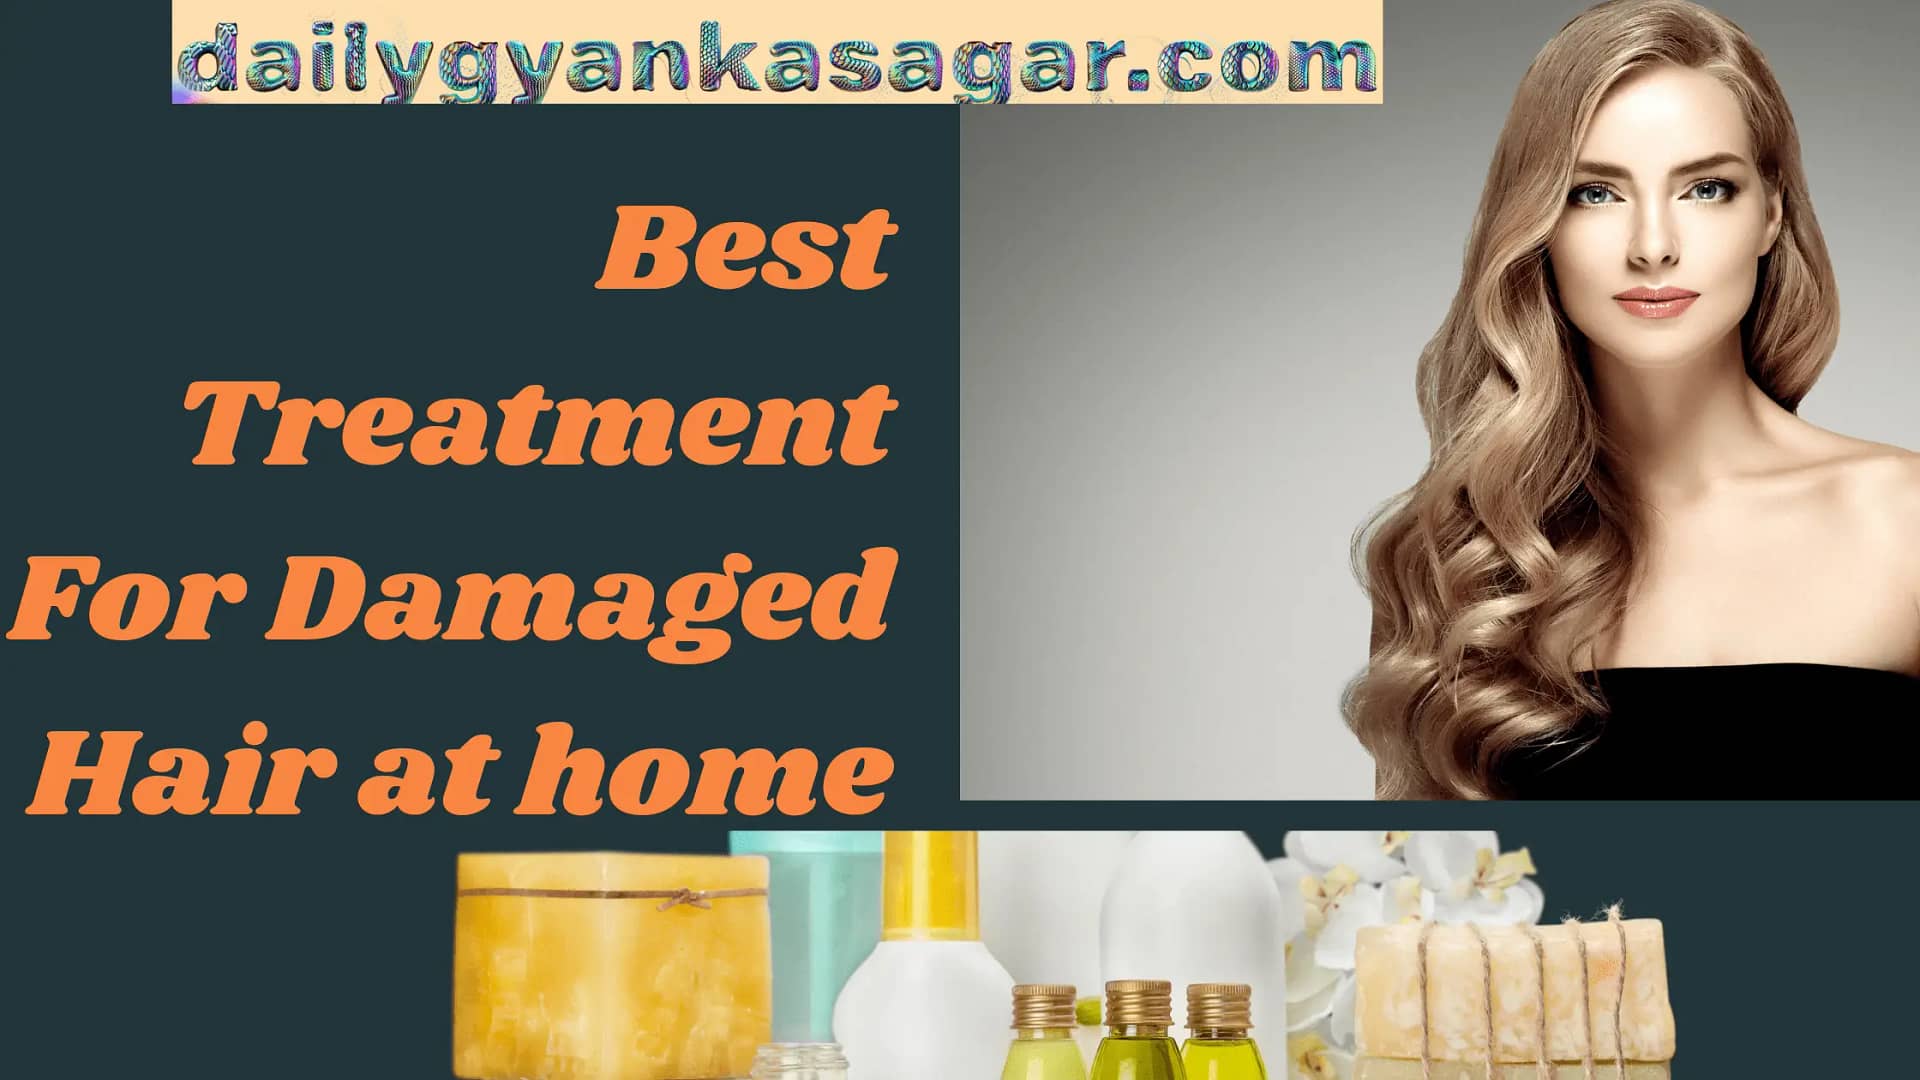 Best Treatment For Damaged Hair at Home